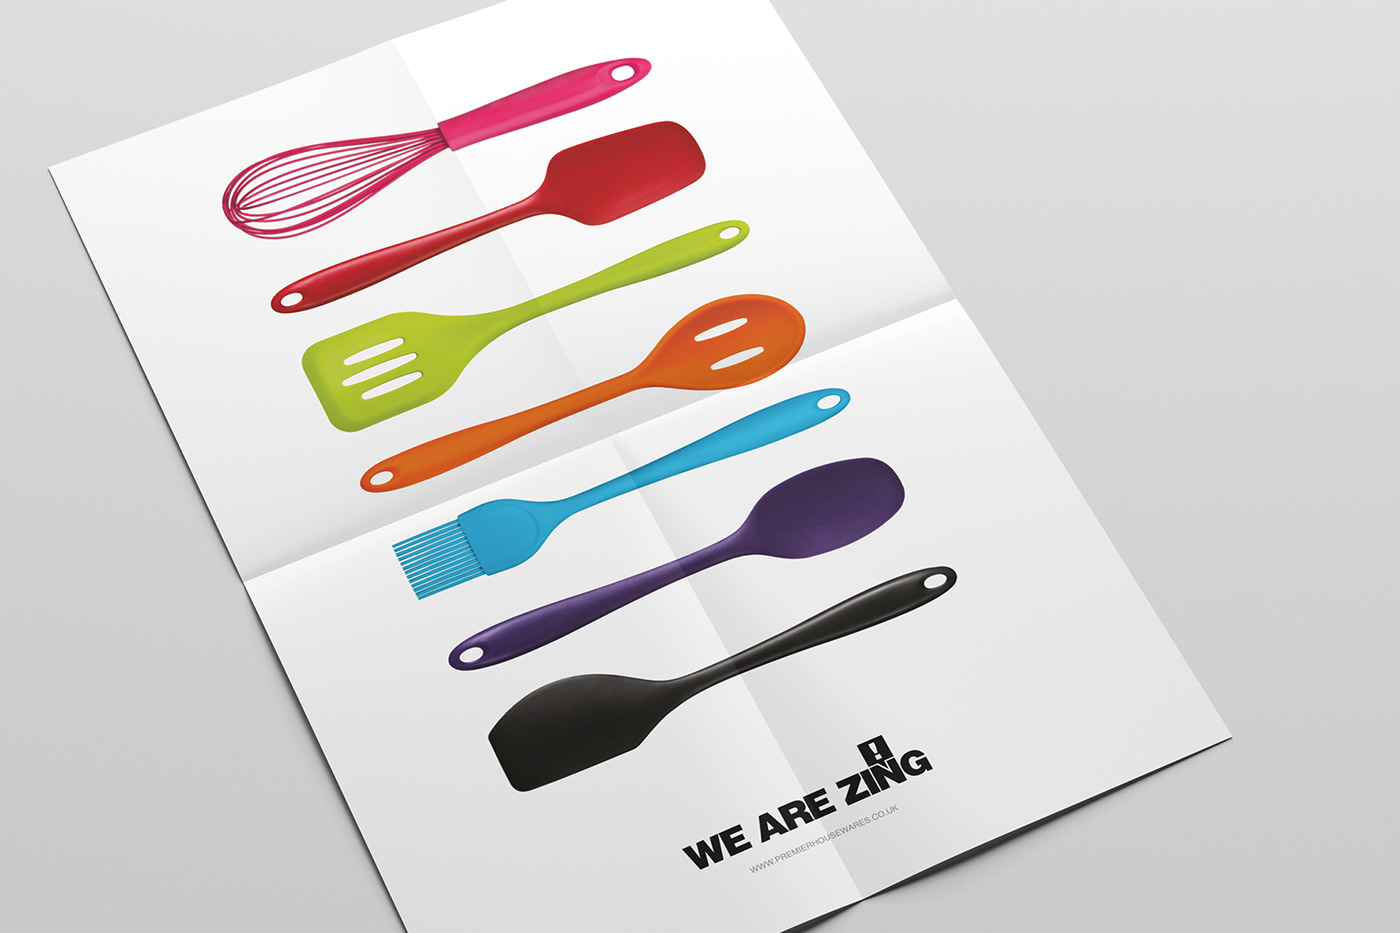 zing colour multi coloured pink lime green blue red purple orange utensils colanders premier houseware housewares homewares homeware hangtag header card hanger Packaging brand logo KITCHENWARE cookware kitchen silicone rubber spoon spatula Turner tongs brush rolling pin box Fun Colourful  premium quirky Character helvetica speech bubble